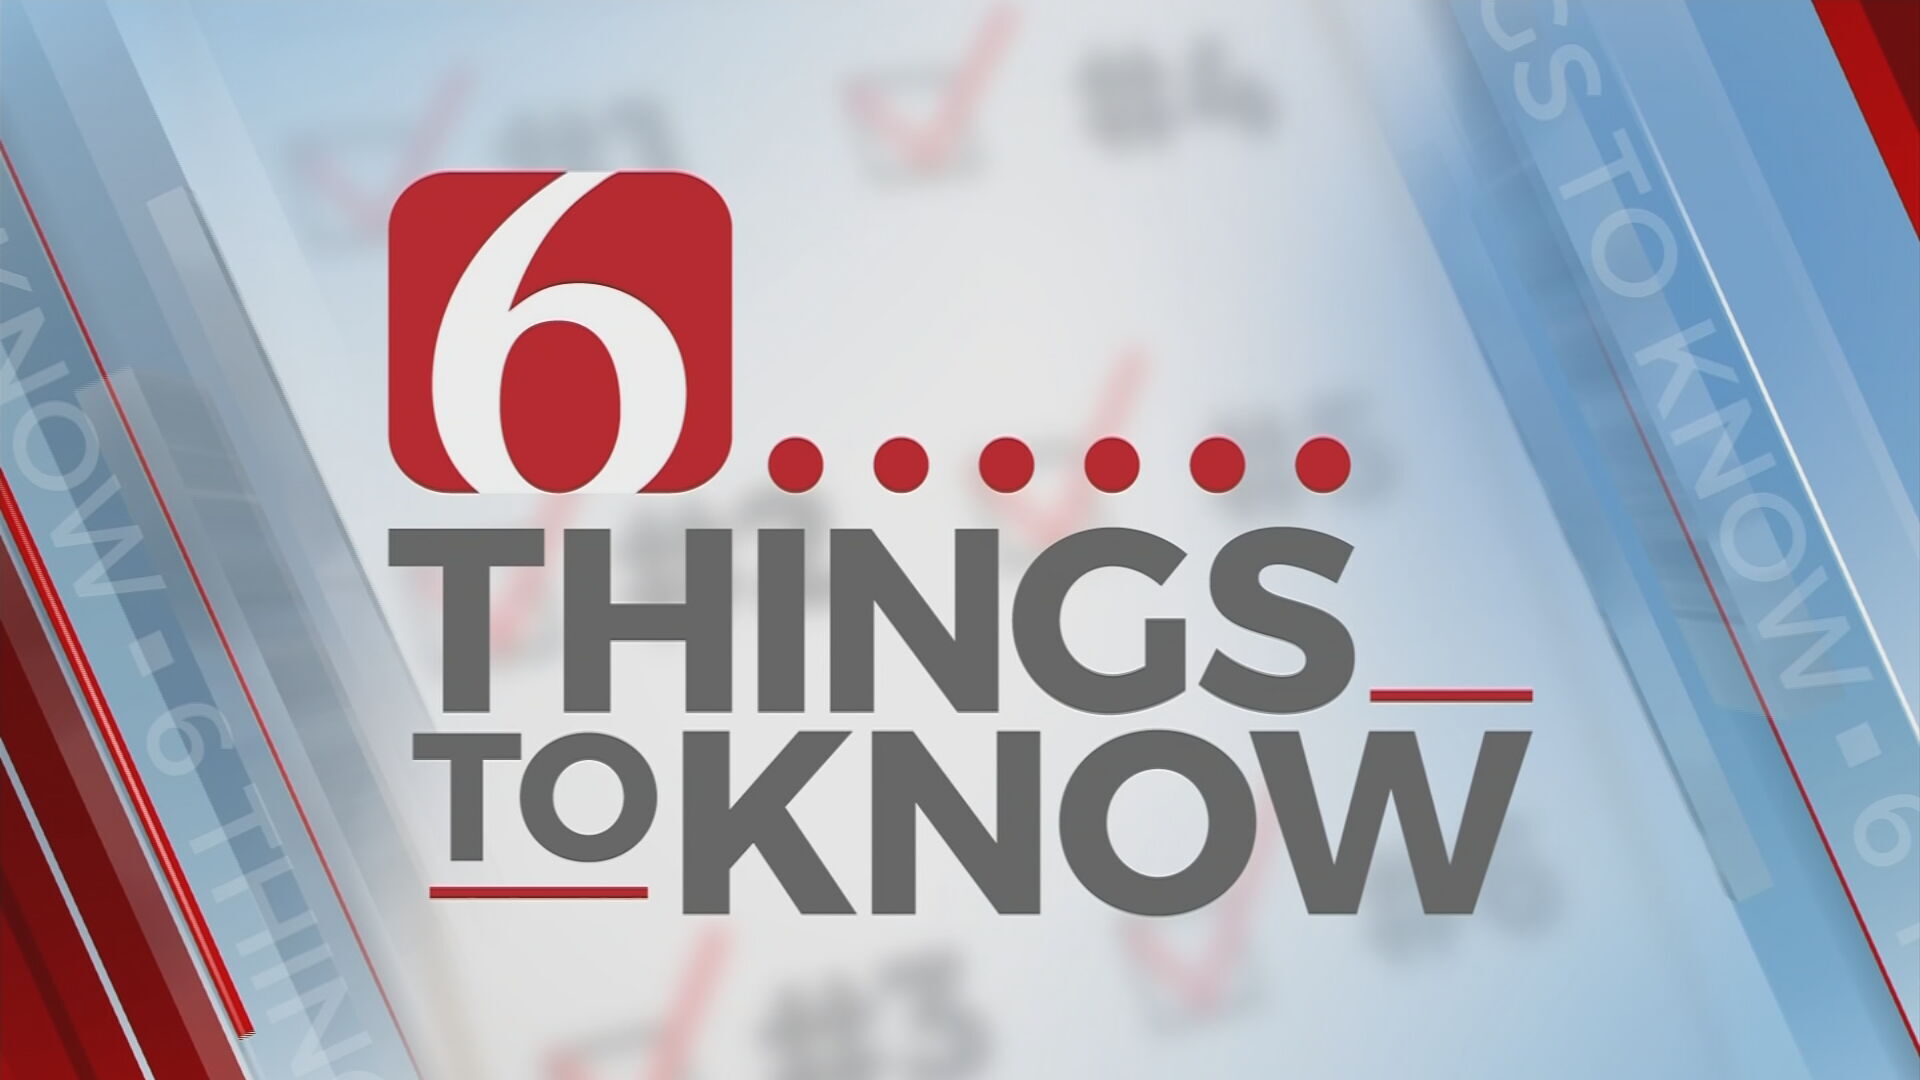 6 Things To Know (Feb 20): Food Pantry In Need & Food For Families In Need